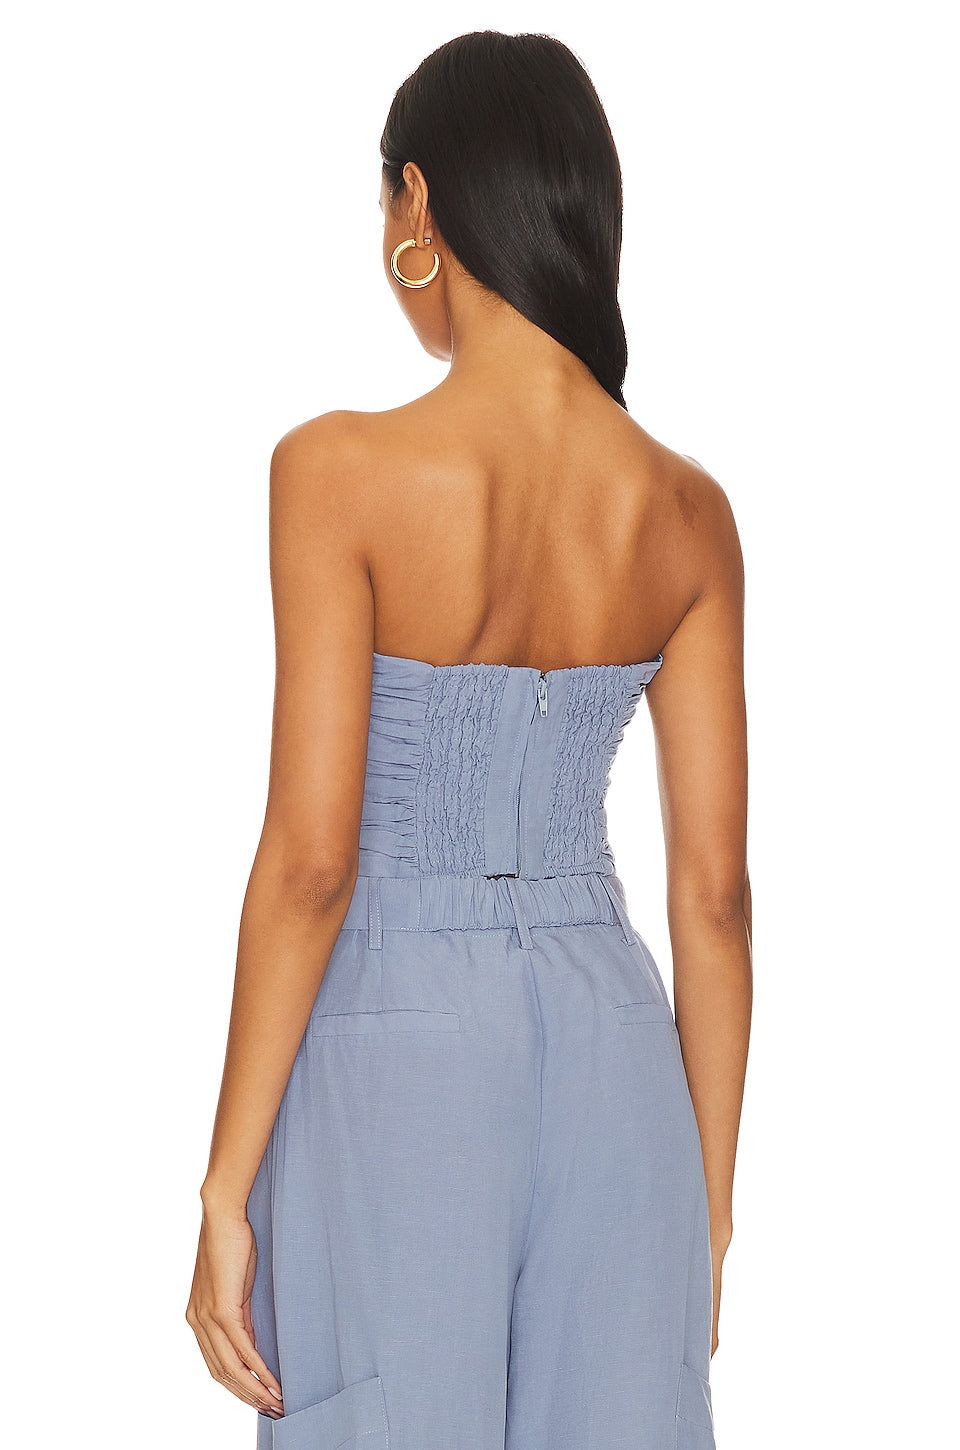 SOVERE Nouvelle Bustier in Blue Haze Size X-Small